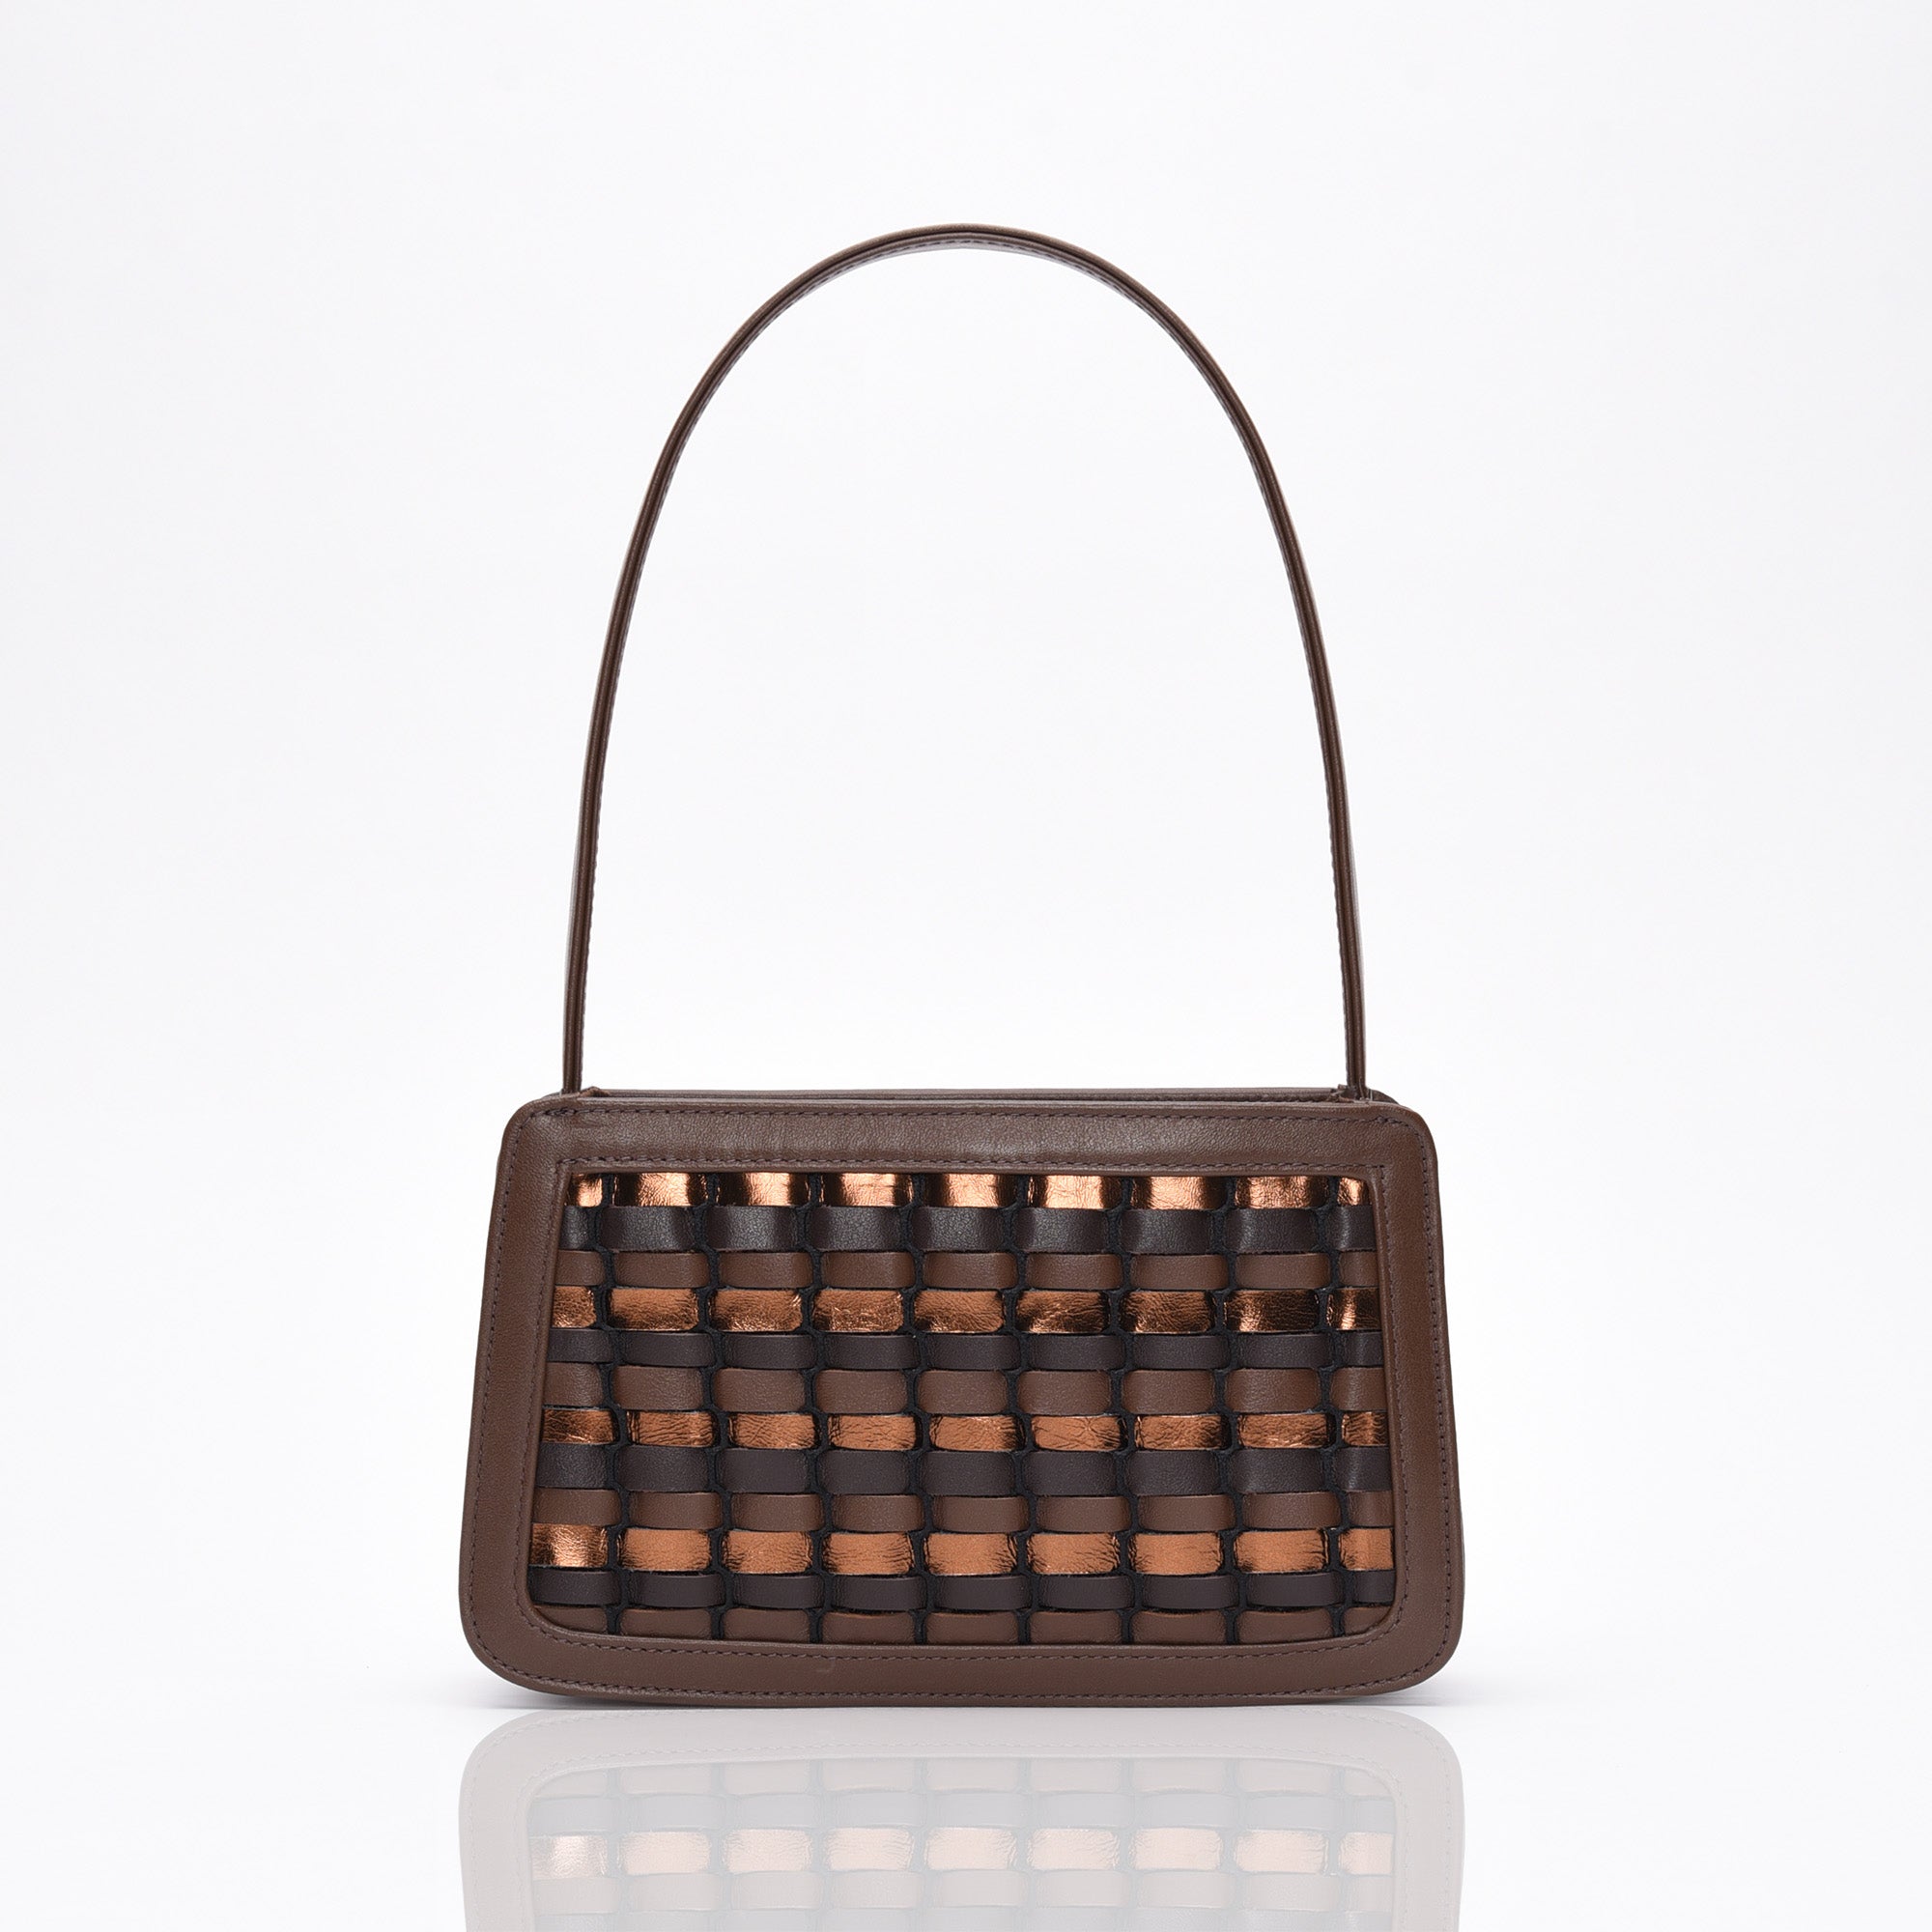 picture of made in USA Luxury Leather Handbag hand-woven with multiple leathers in various chocolate brown, matte brown, and metallic colorway